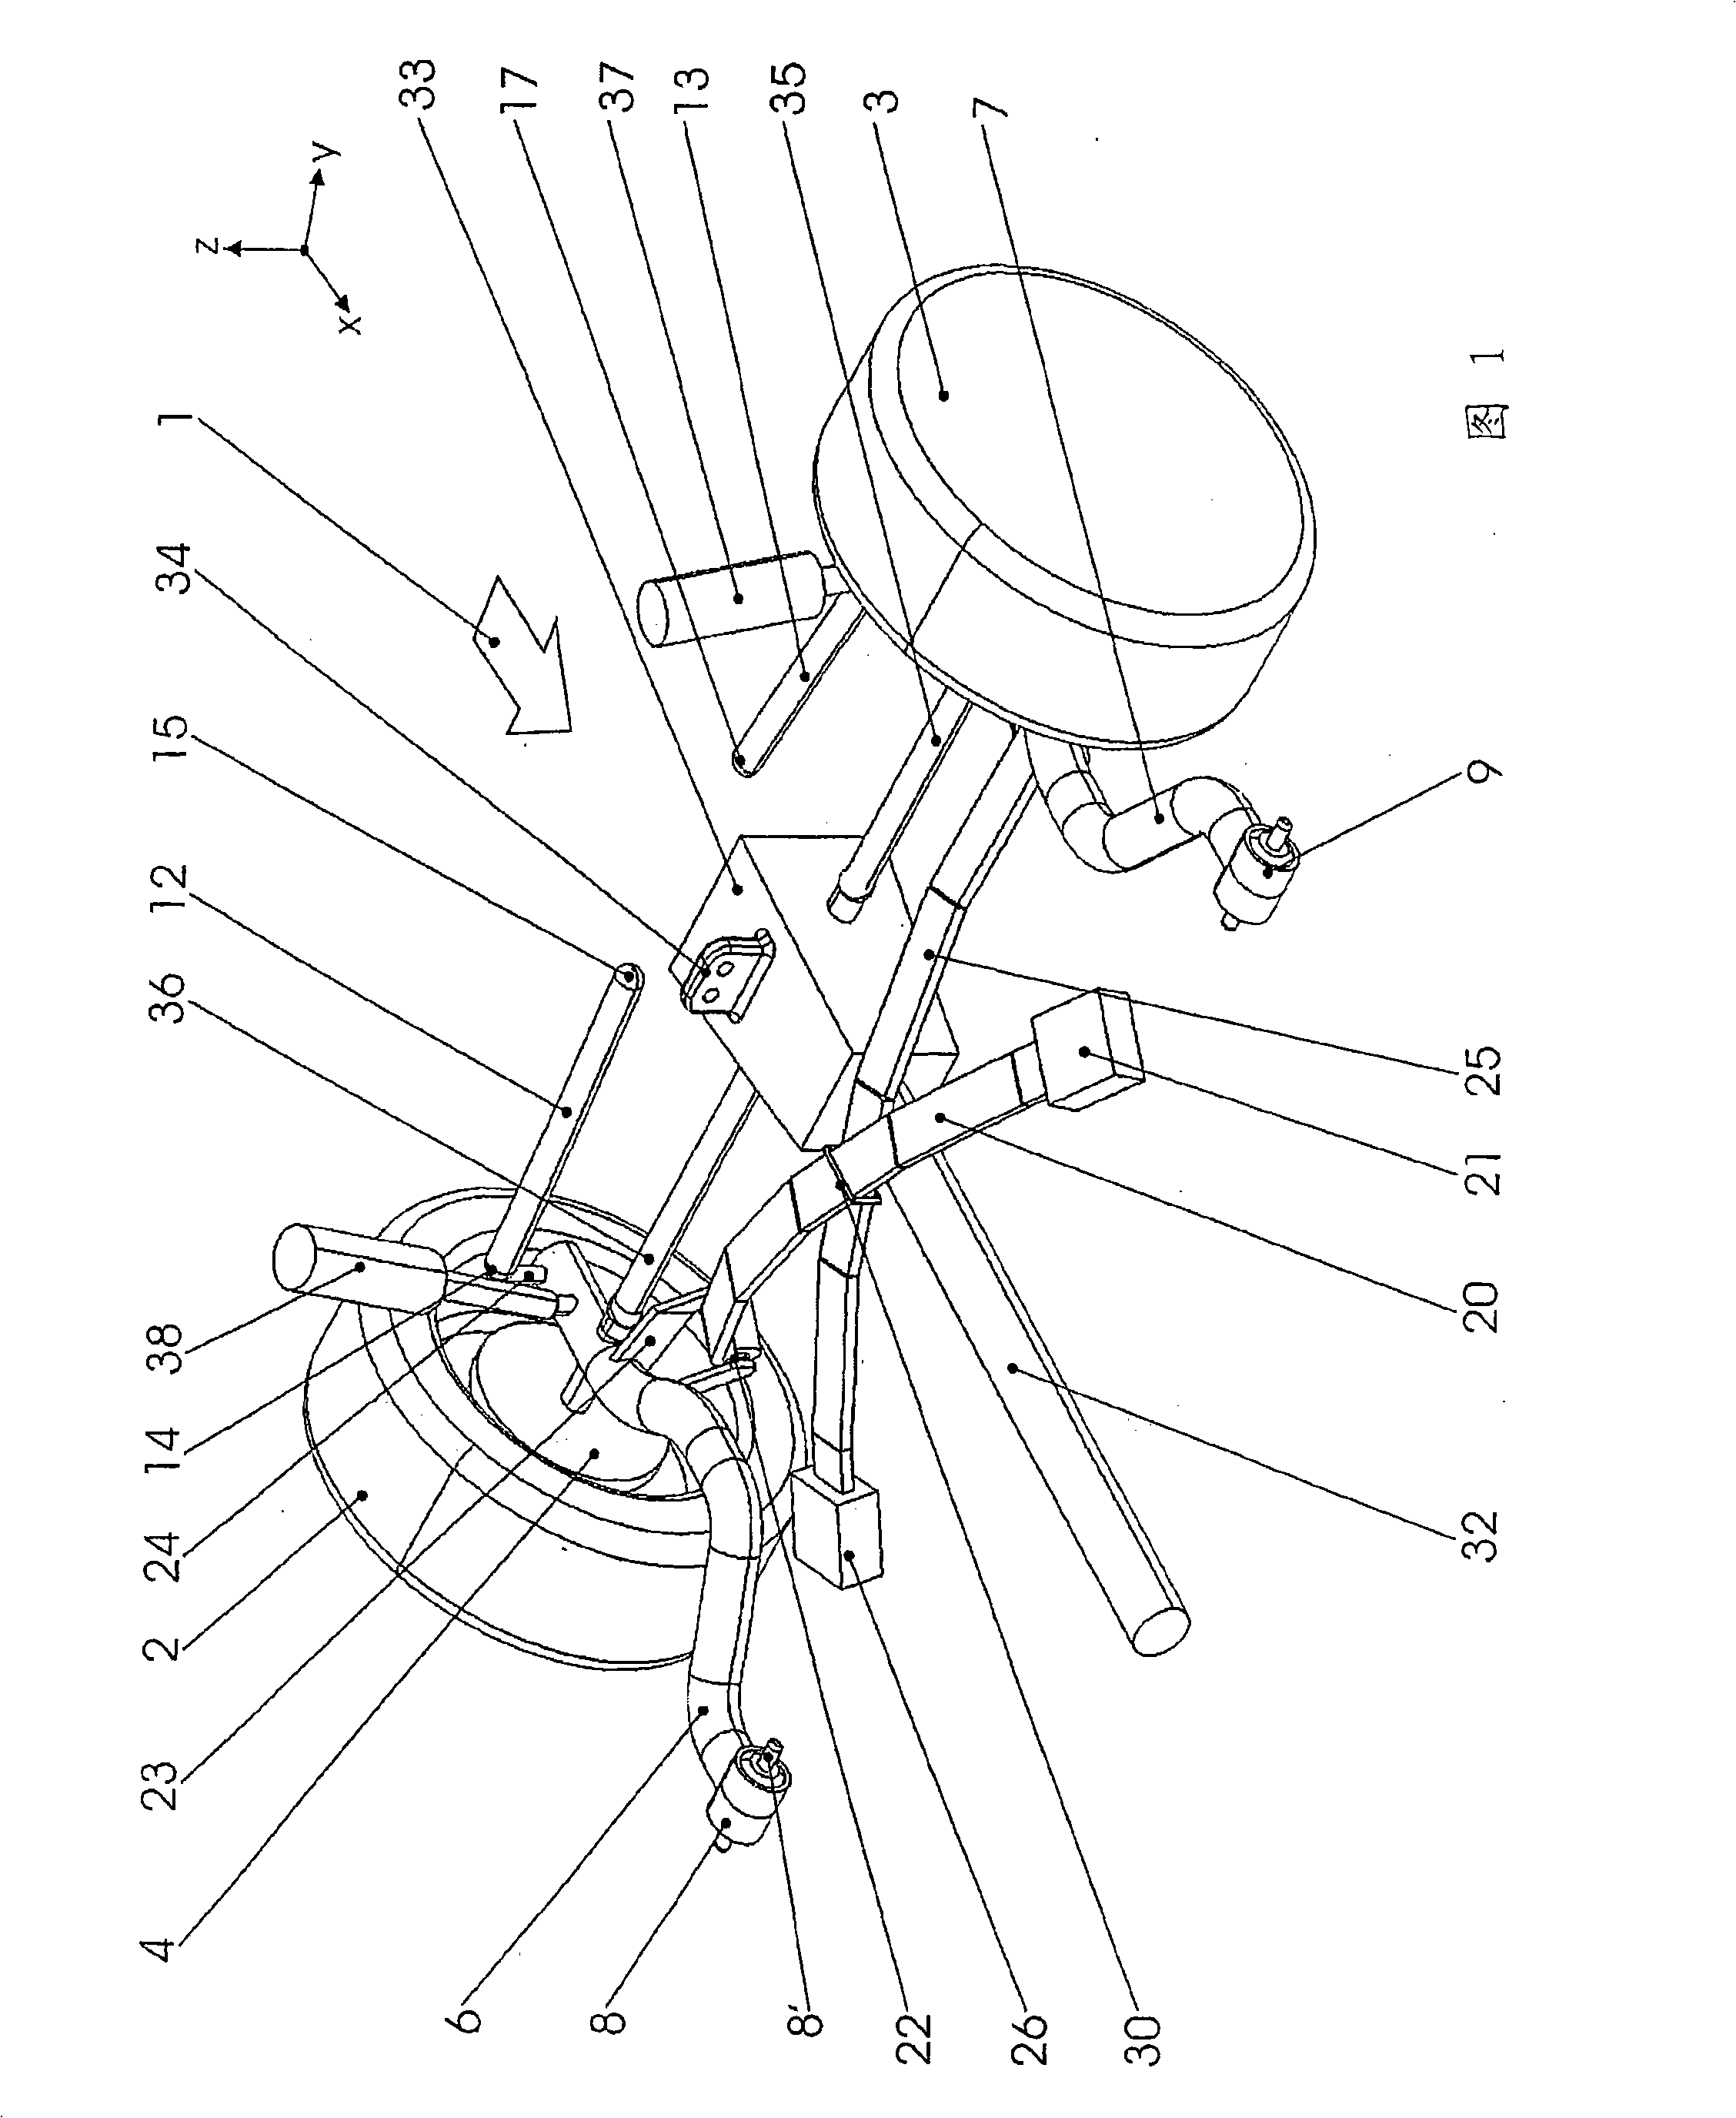 Independent wheel suspension for motor vehicles